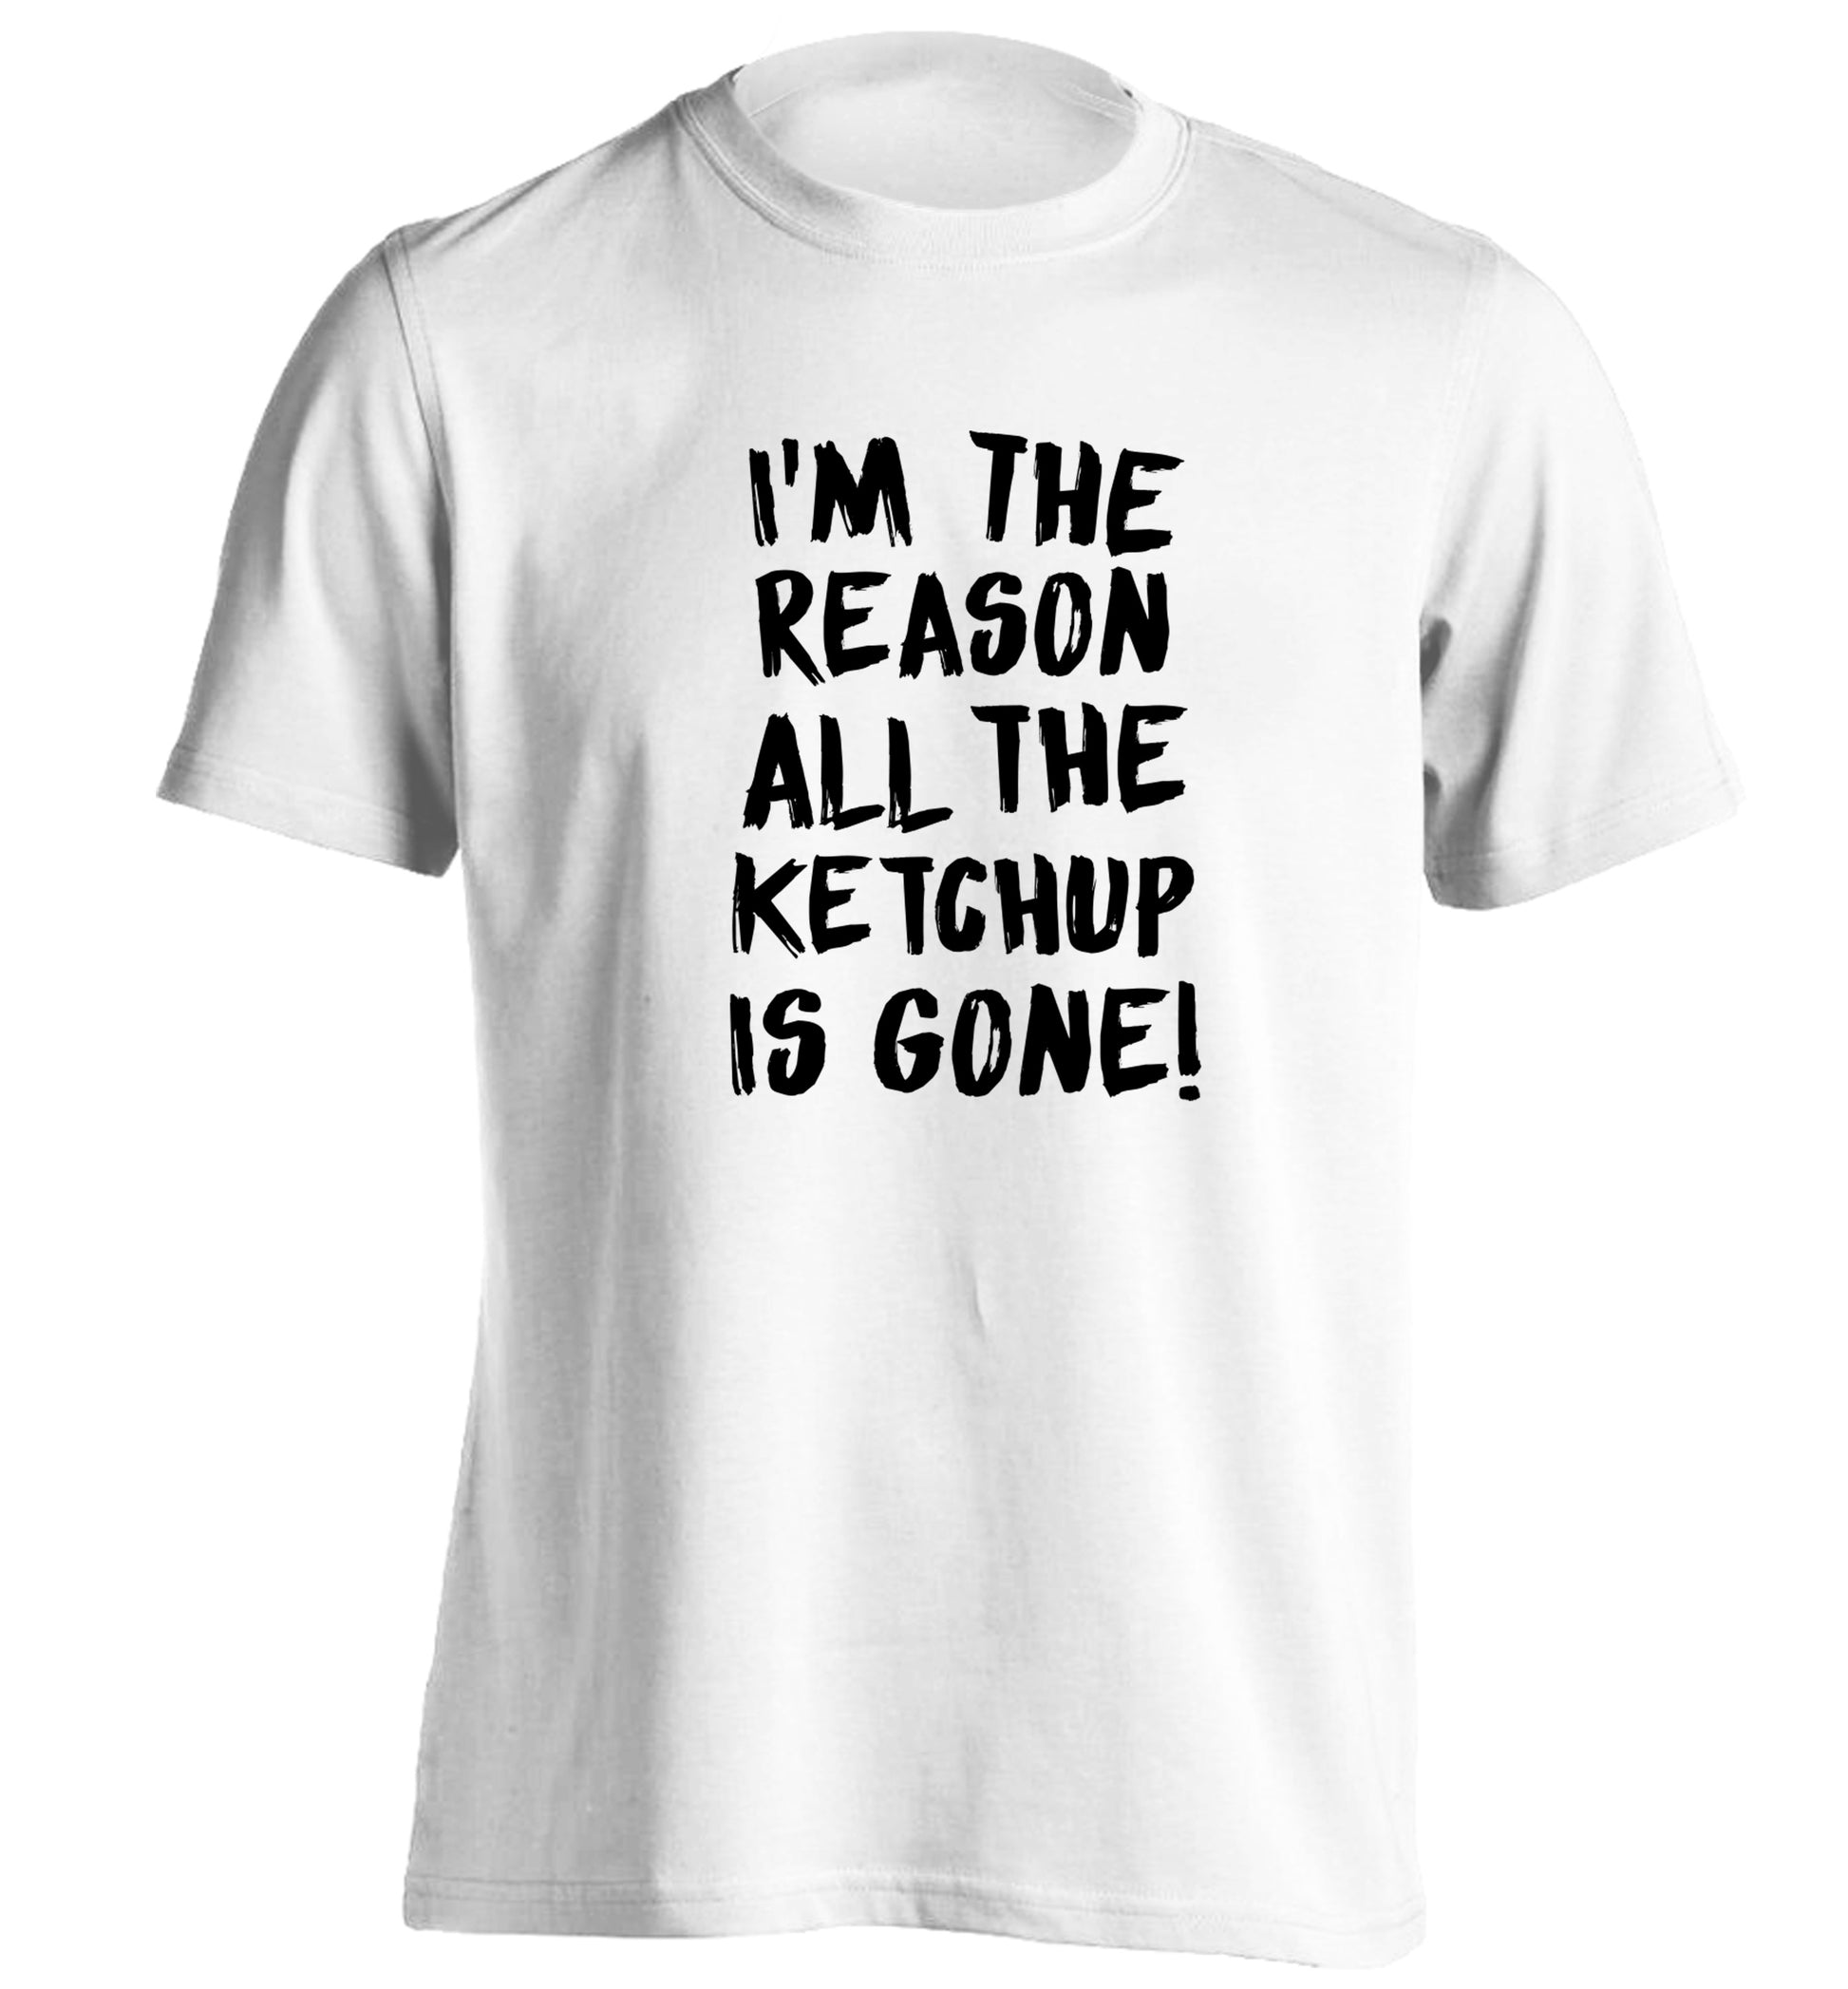 I'm the reason why all the ketchup is gone adults unisex white Tshirt 2XL